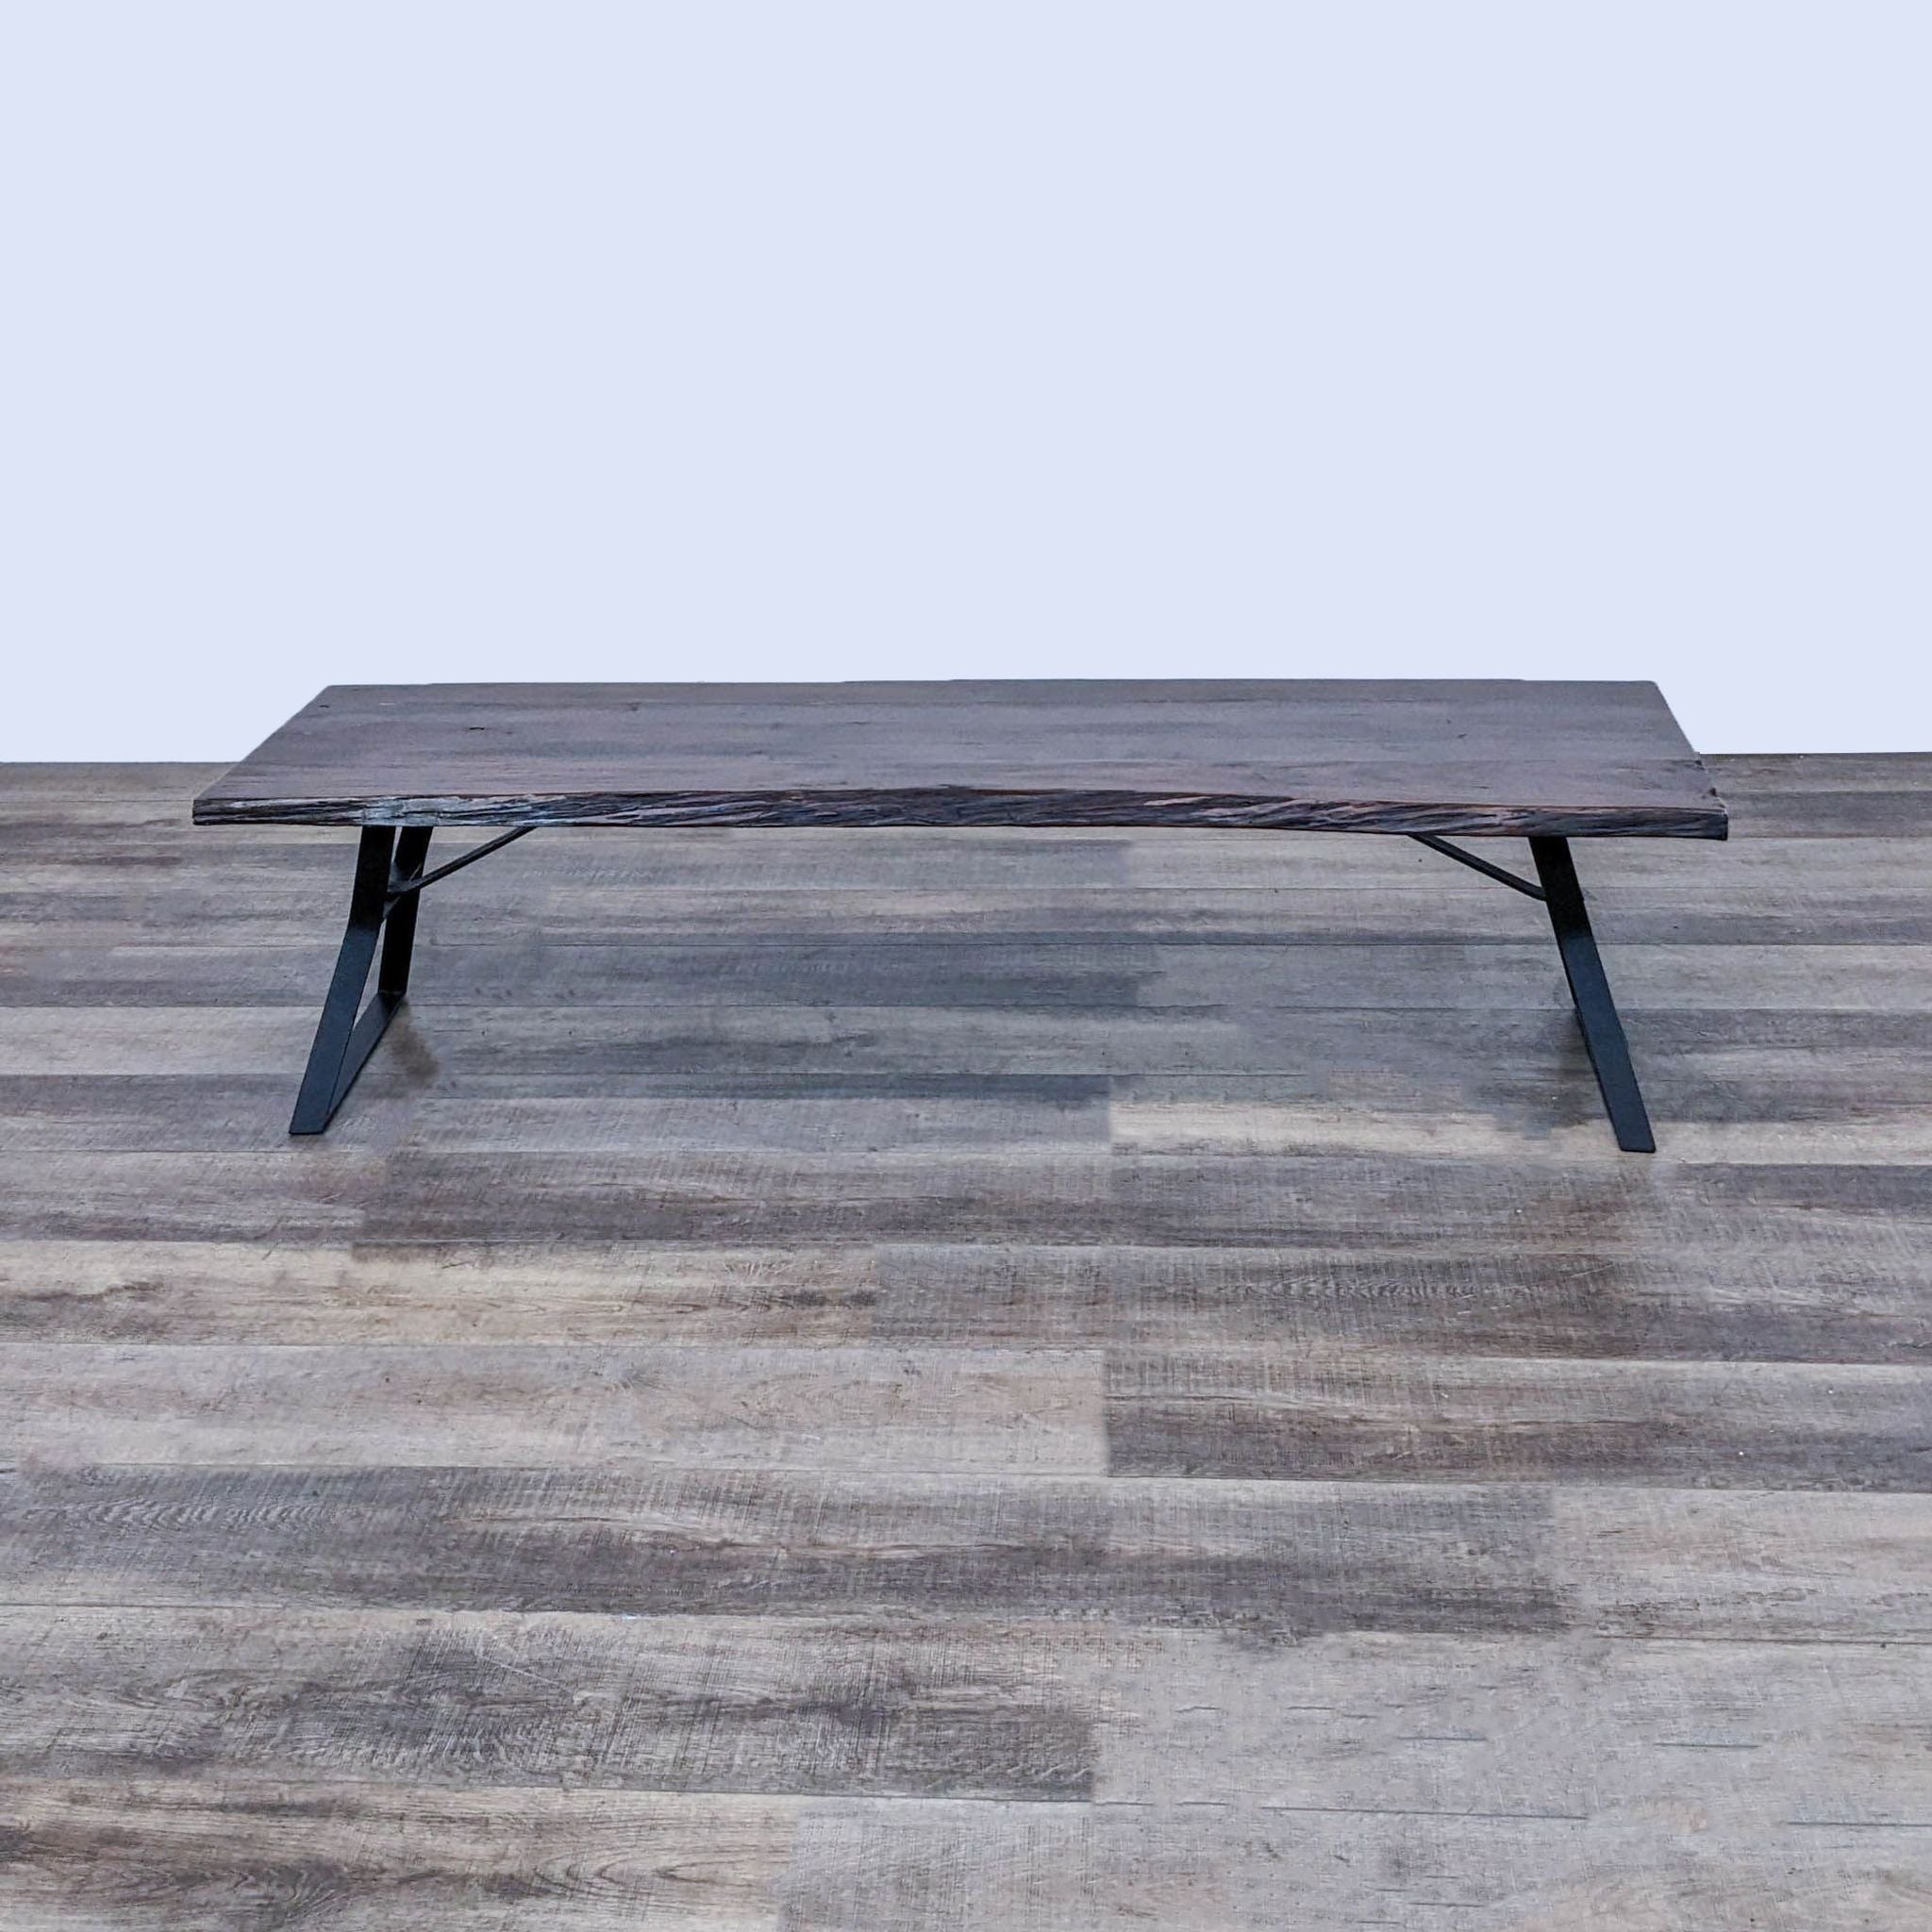 Dark-toned Reperch coffee table with a sleek metal base, positioned on a textured wood floor.